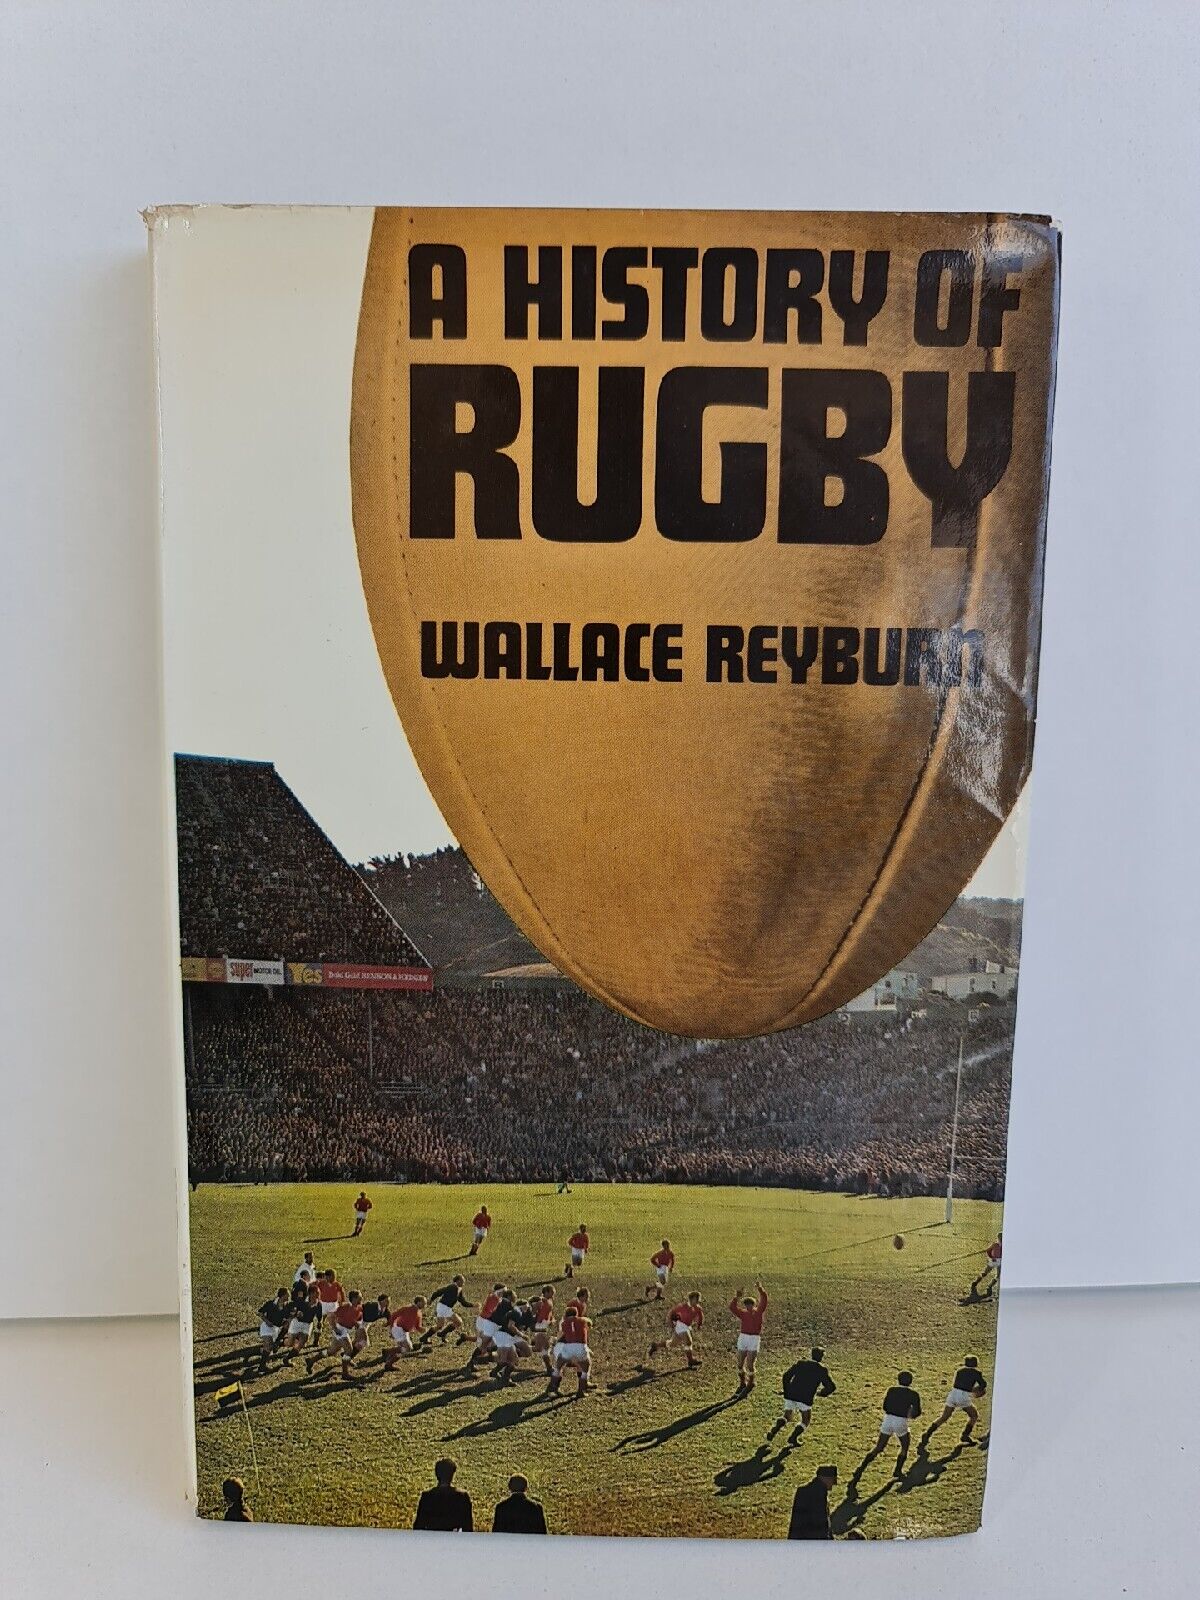 History of Rugby by Wallace Reyburn (1971)